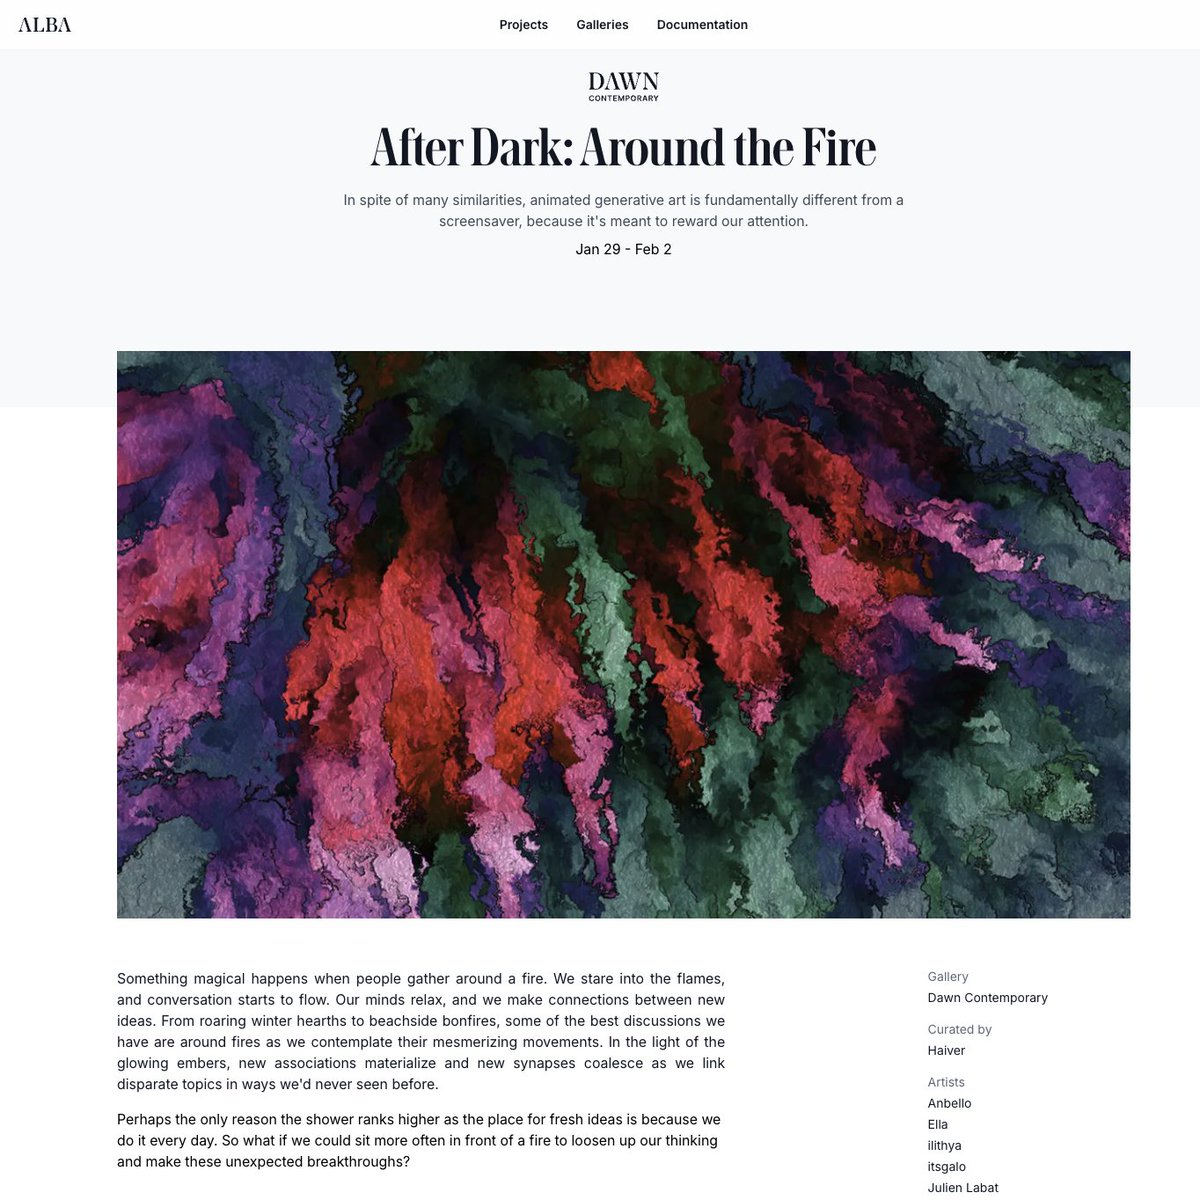 The exhibition page for the next group show I curated on Alba is up. 1,500 words about animated generative art as the modern-day fireplace, and how the history of the screensaver fits into all of that. I hope you'll check it out 👇